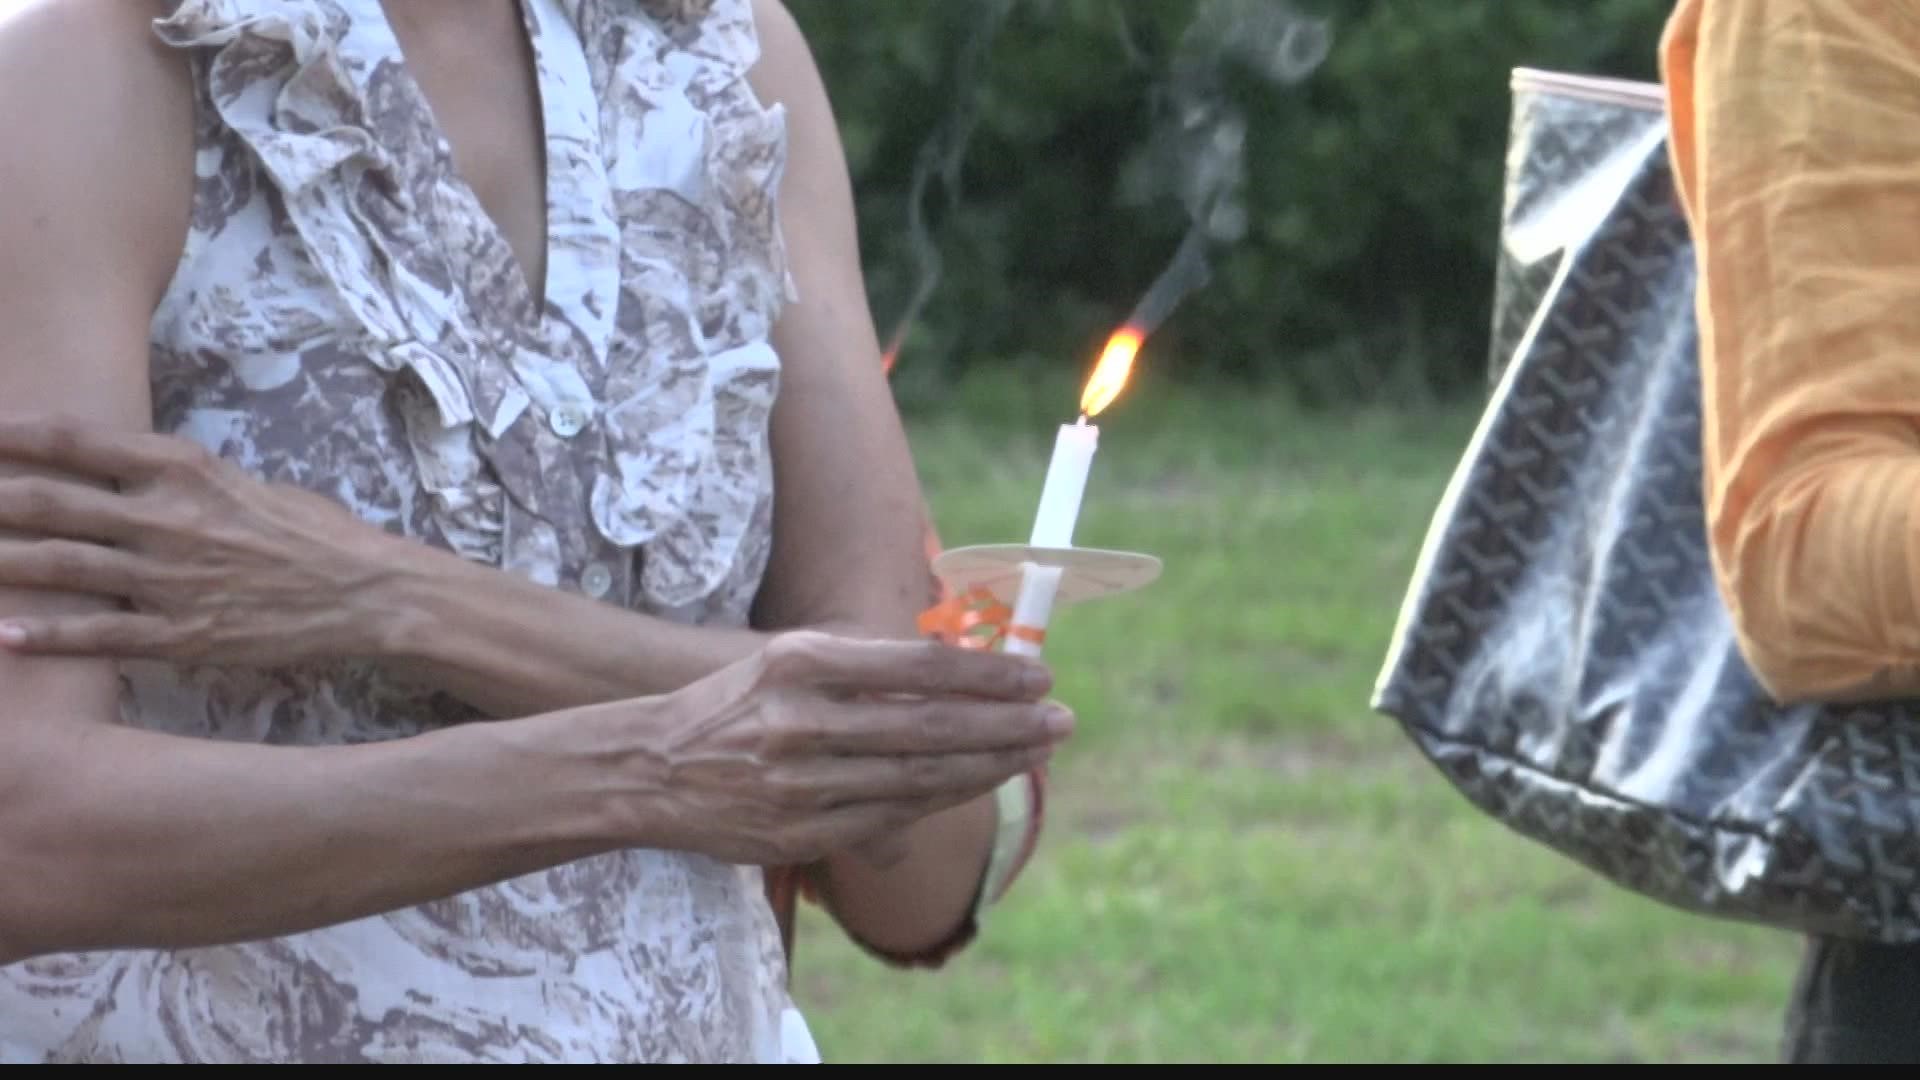 Organizers held the vigil at Davis Park to reflect on the shootings in Buffalo, New York and Uvalde, Texas.